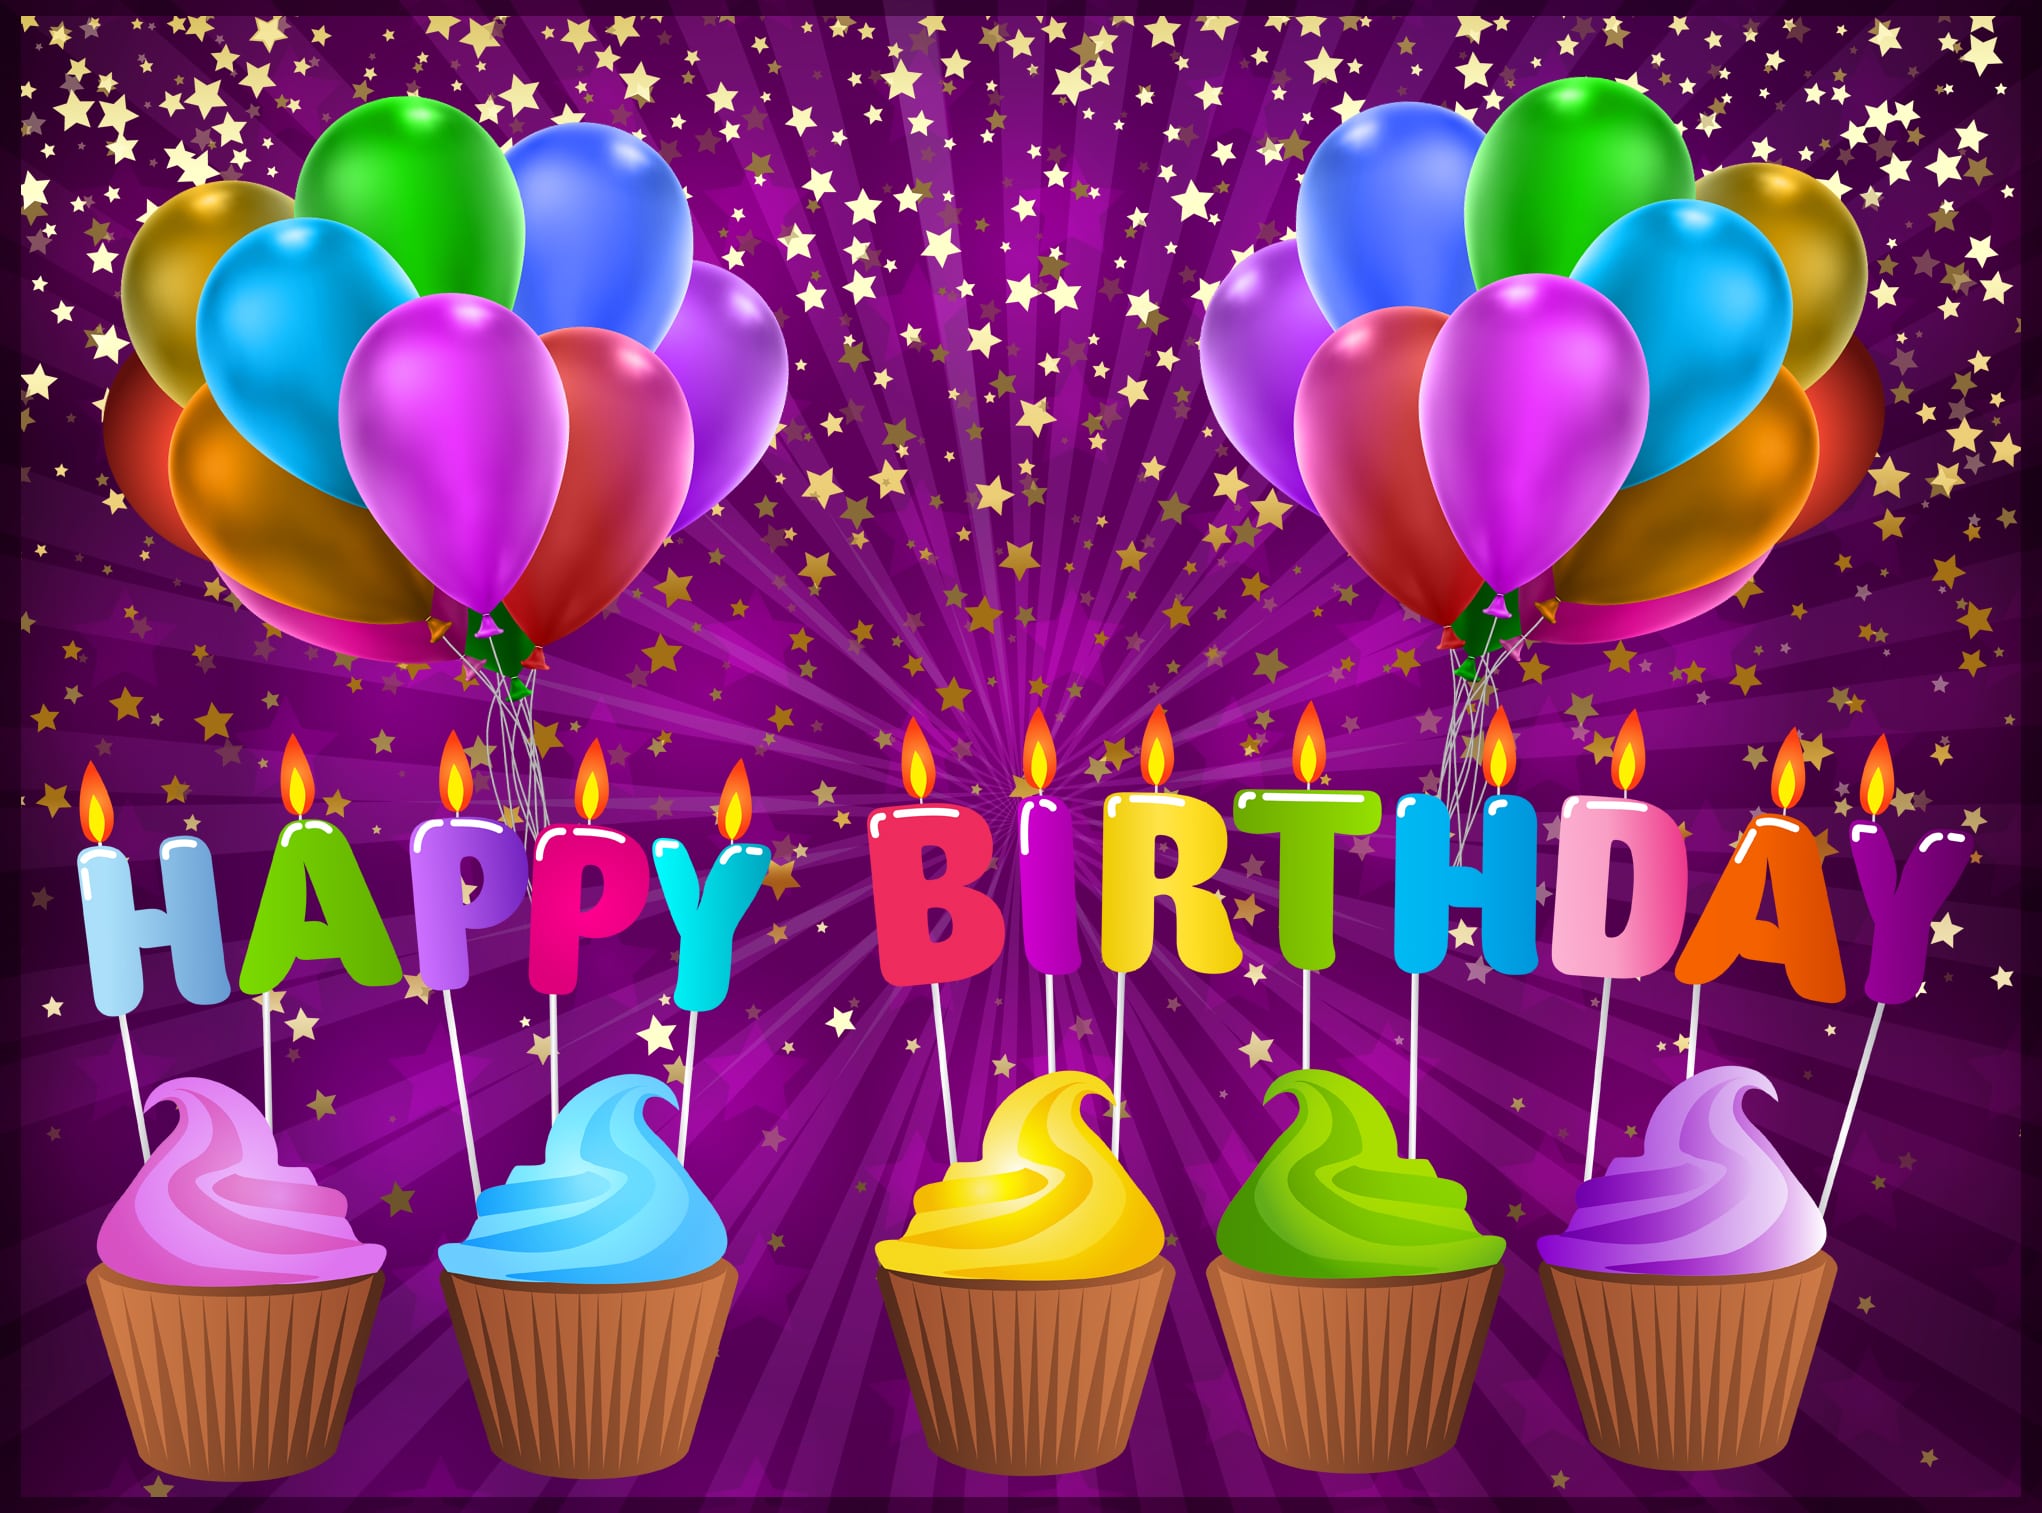 Happy Birthday Greeting Cards | Free Birthday Cards Download